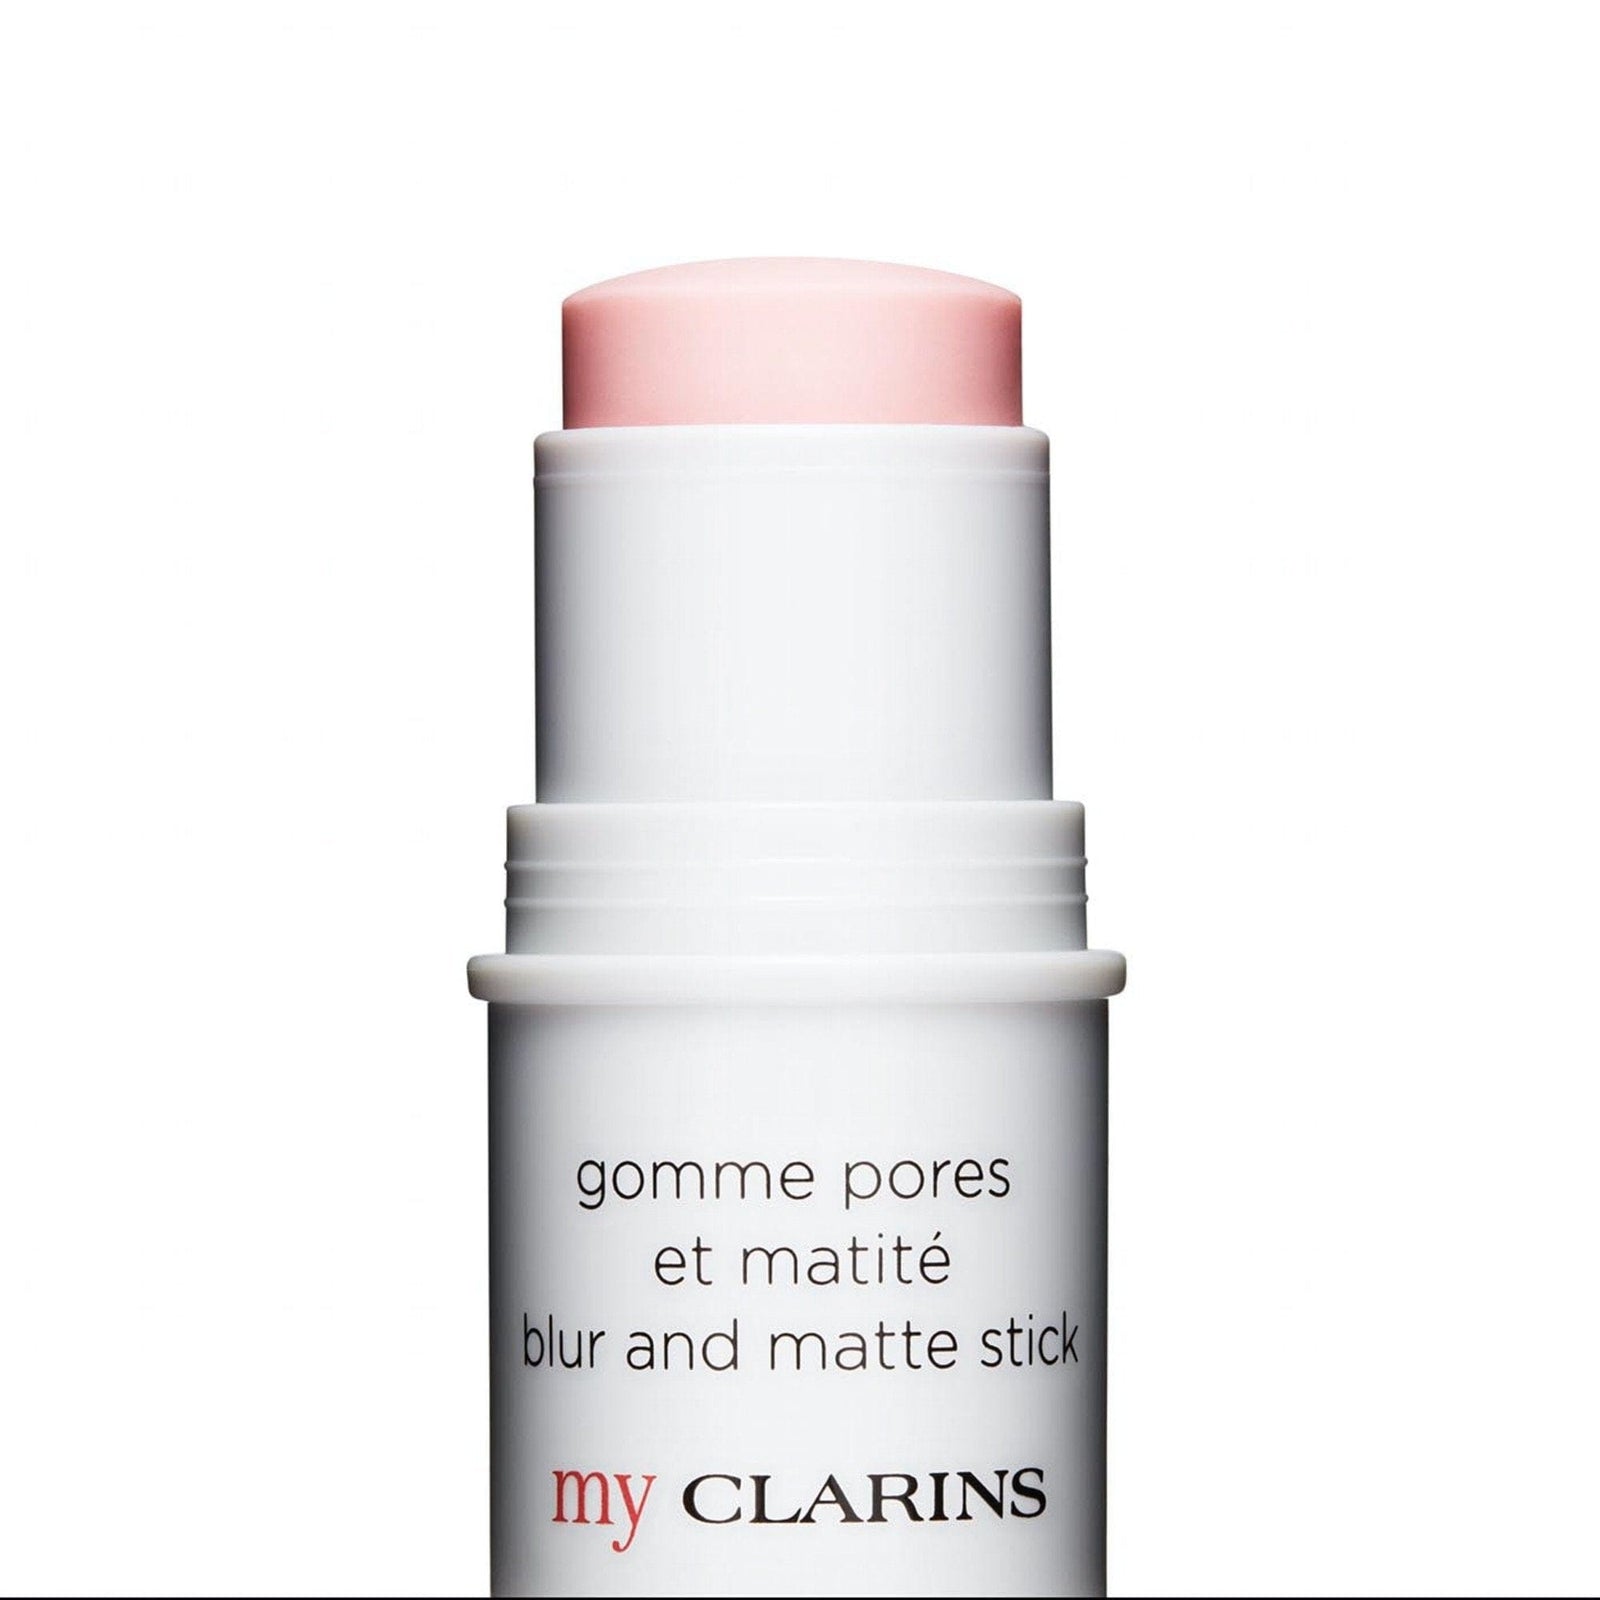 Clarins My Clarins Pore-Less Blur and Matte Stick for All Skin Types 3.2g